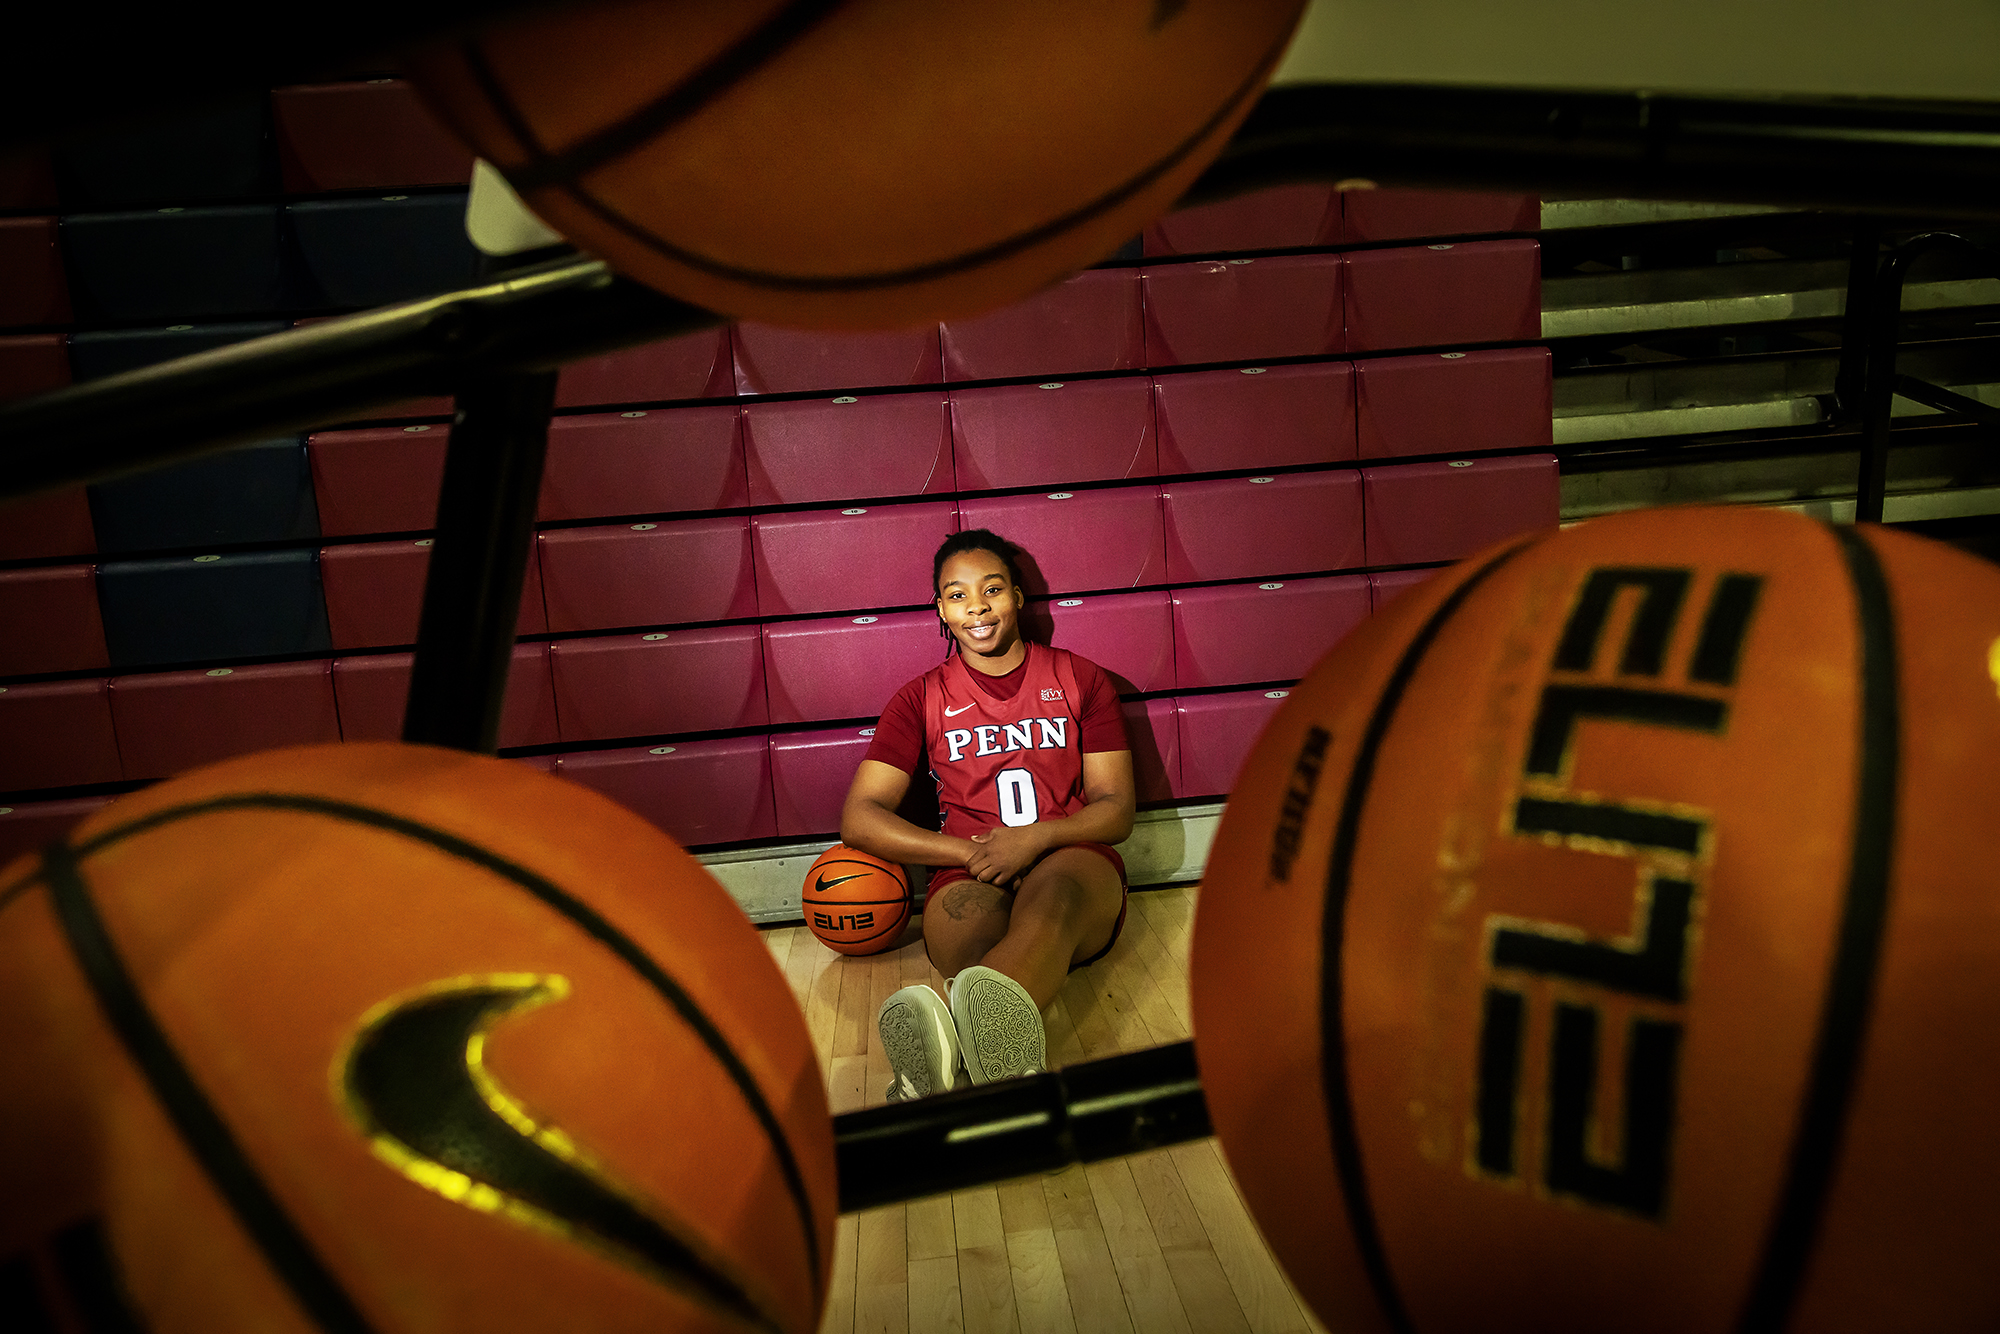 Jordan Obi sits on the court with her elbow rested on a basketball, wearing her red Penn jersey.